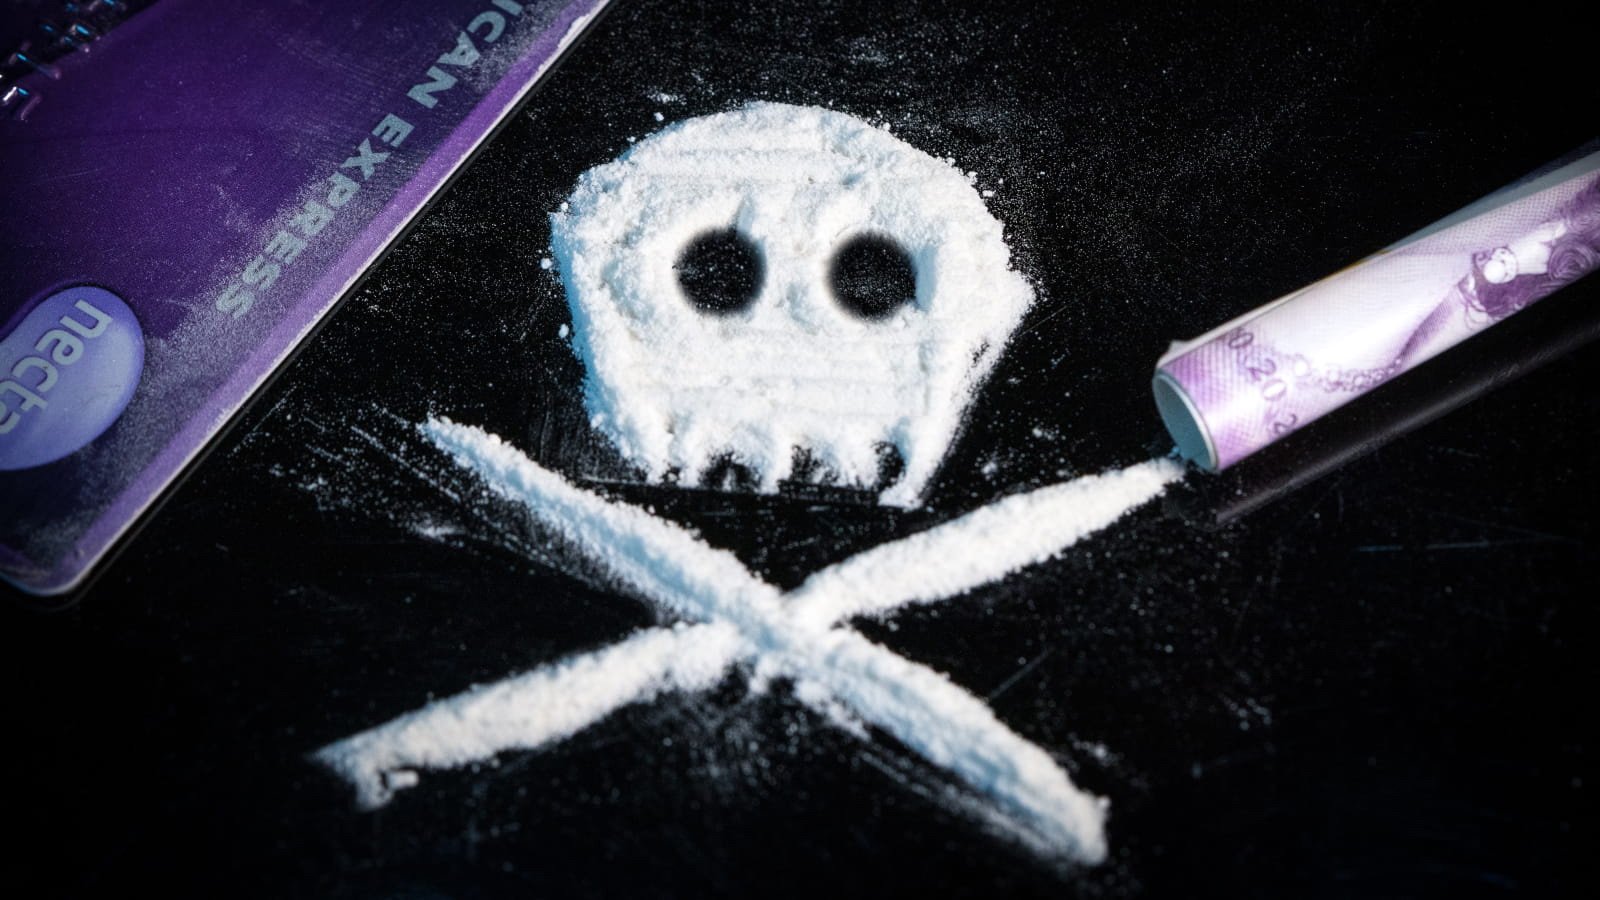 Drugs in the shape of a skull and crossbones